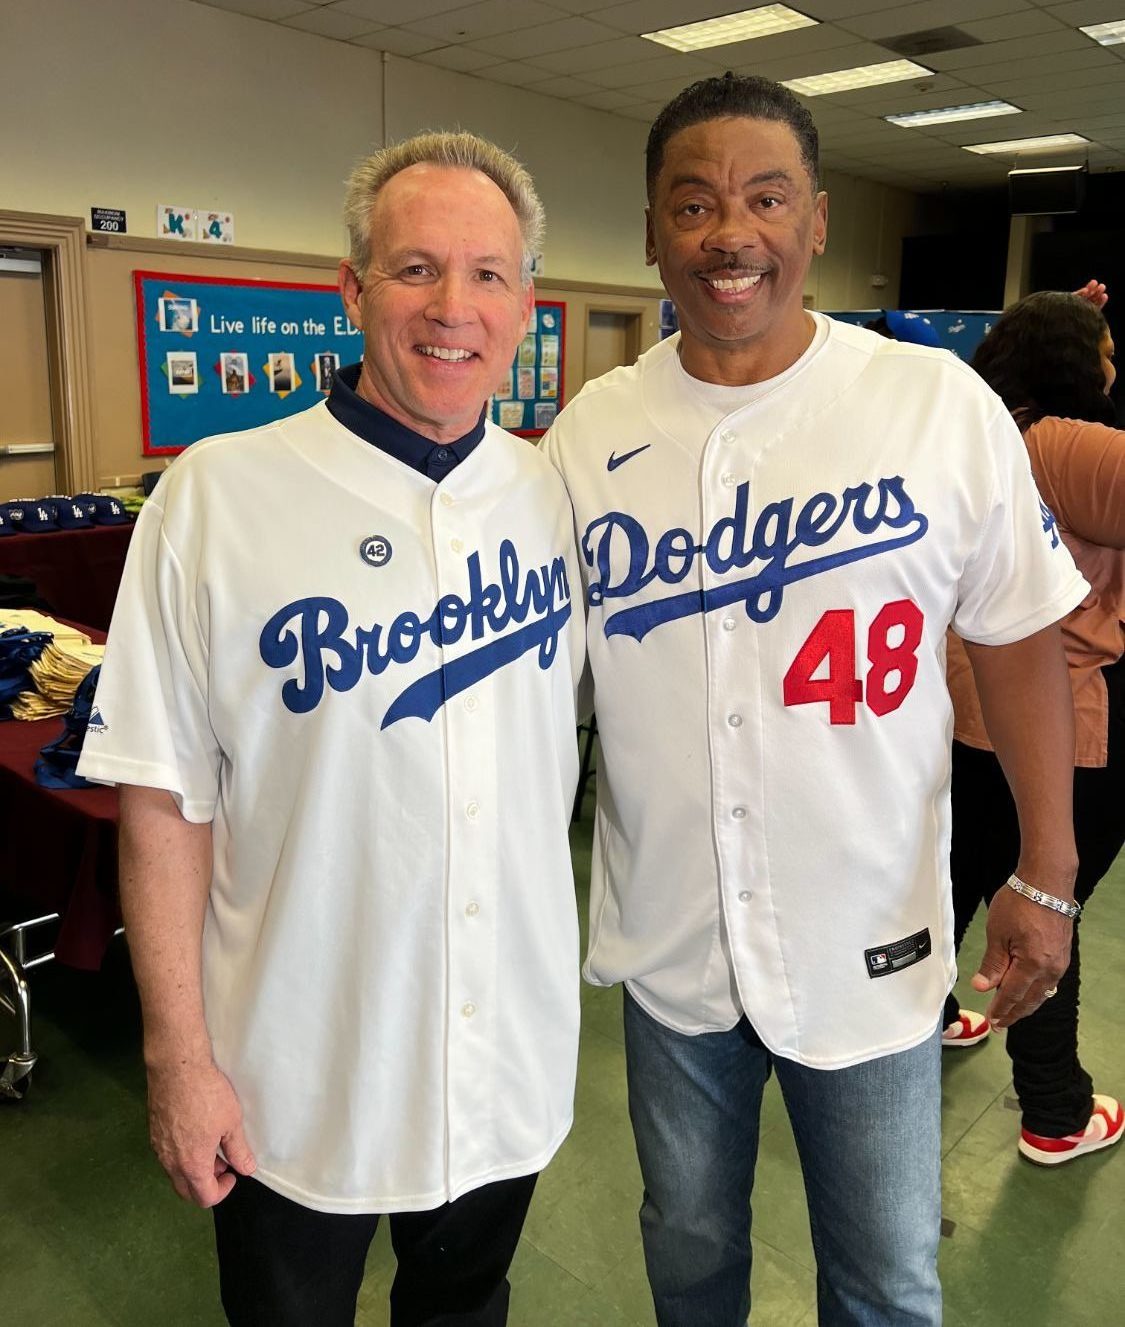 P)HOTO: provided by Mark Langill | The South Pasadenan | Not only does Mark Langill, left, know plenty about the Los Angeles Dodgers, but also a whole lot about Brooklyn, the club’s original home. Above, he’s joined by former Dodger pitcher Dennis Powell at Jackie Robinson’s former elementary school in Pasadena. It celebrated Jackie Robinson Day in the Major Leagues on the 77th anniversary of Robinson’s debut with the Brooklyn Dodgers.